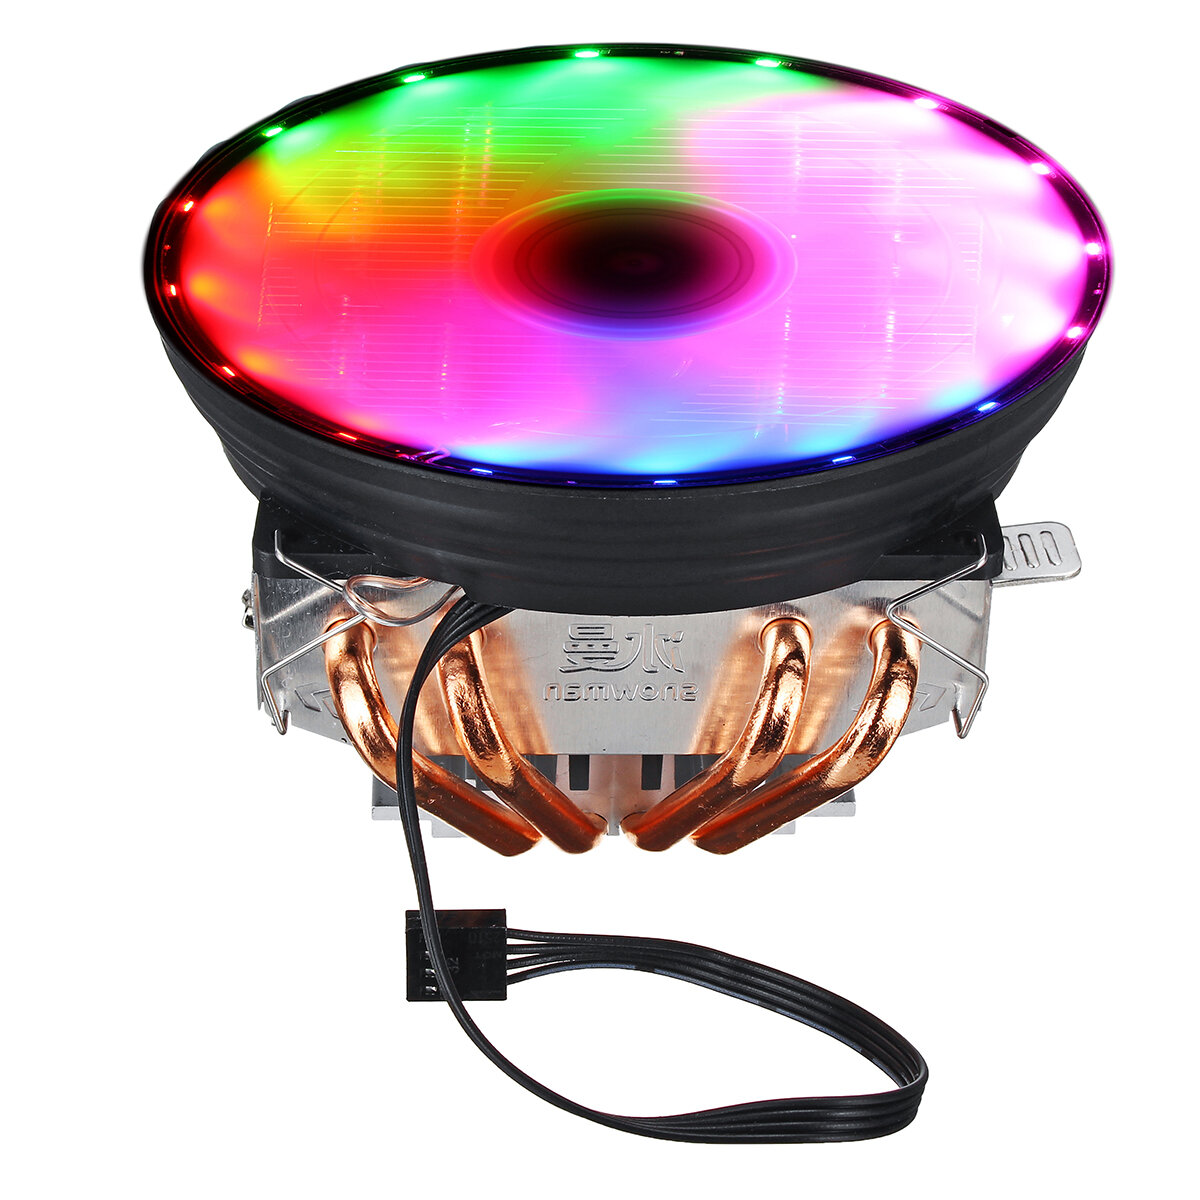 DC 12V 4Pin Colorful Backlight 120mm CPU Cooling Fan PC Heatsink for Intel/AMD For PC Computer Case